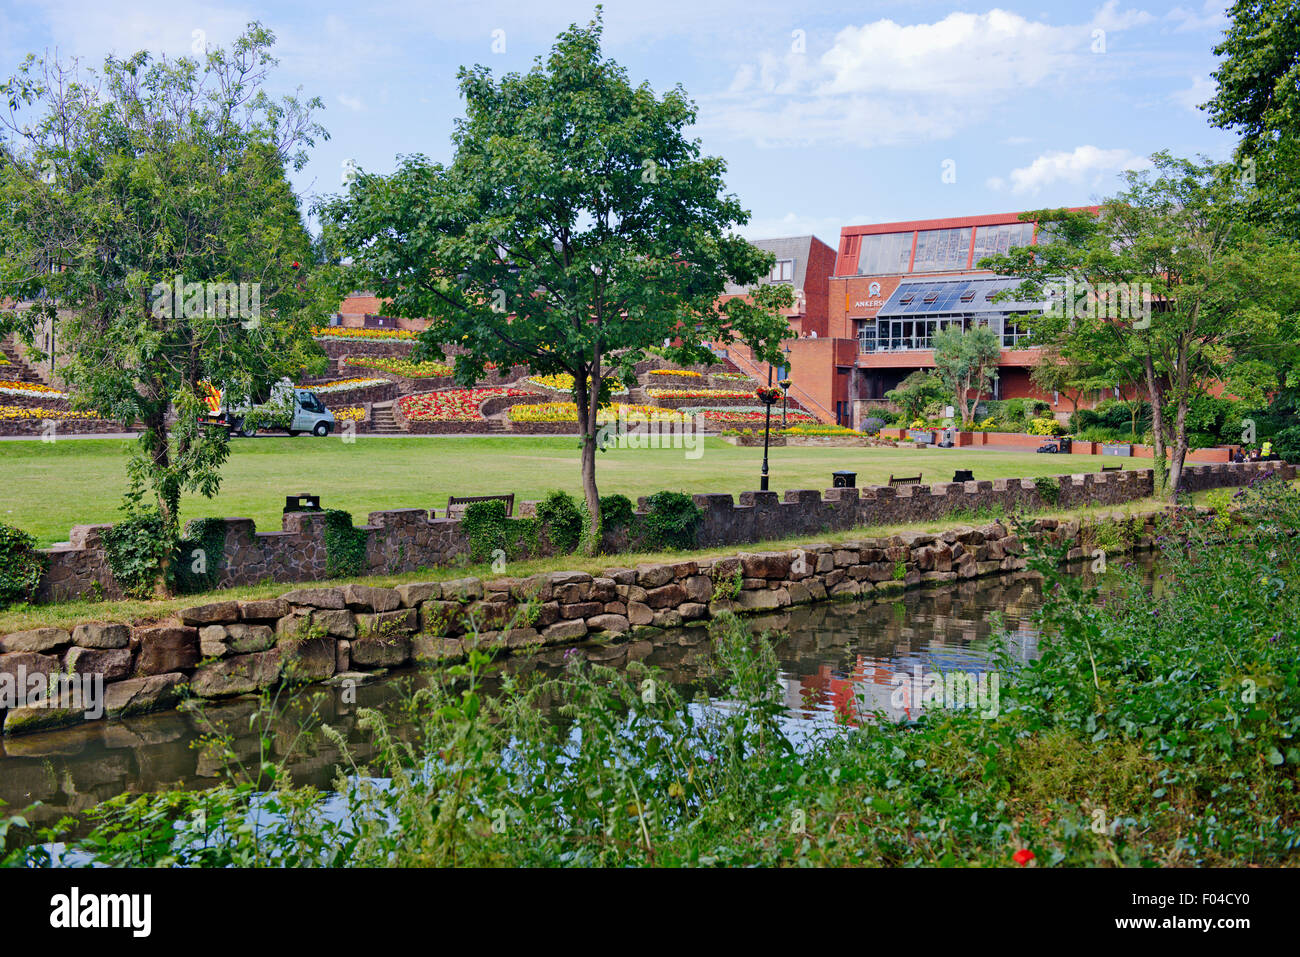 Ankerside Shopping Centre and Castle Park gardens with Anker River, Tamworth, Staffordshire Stock Photo